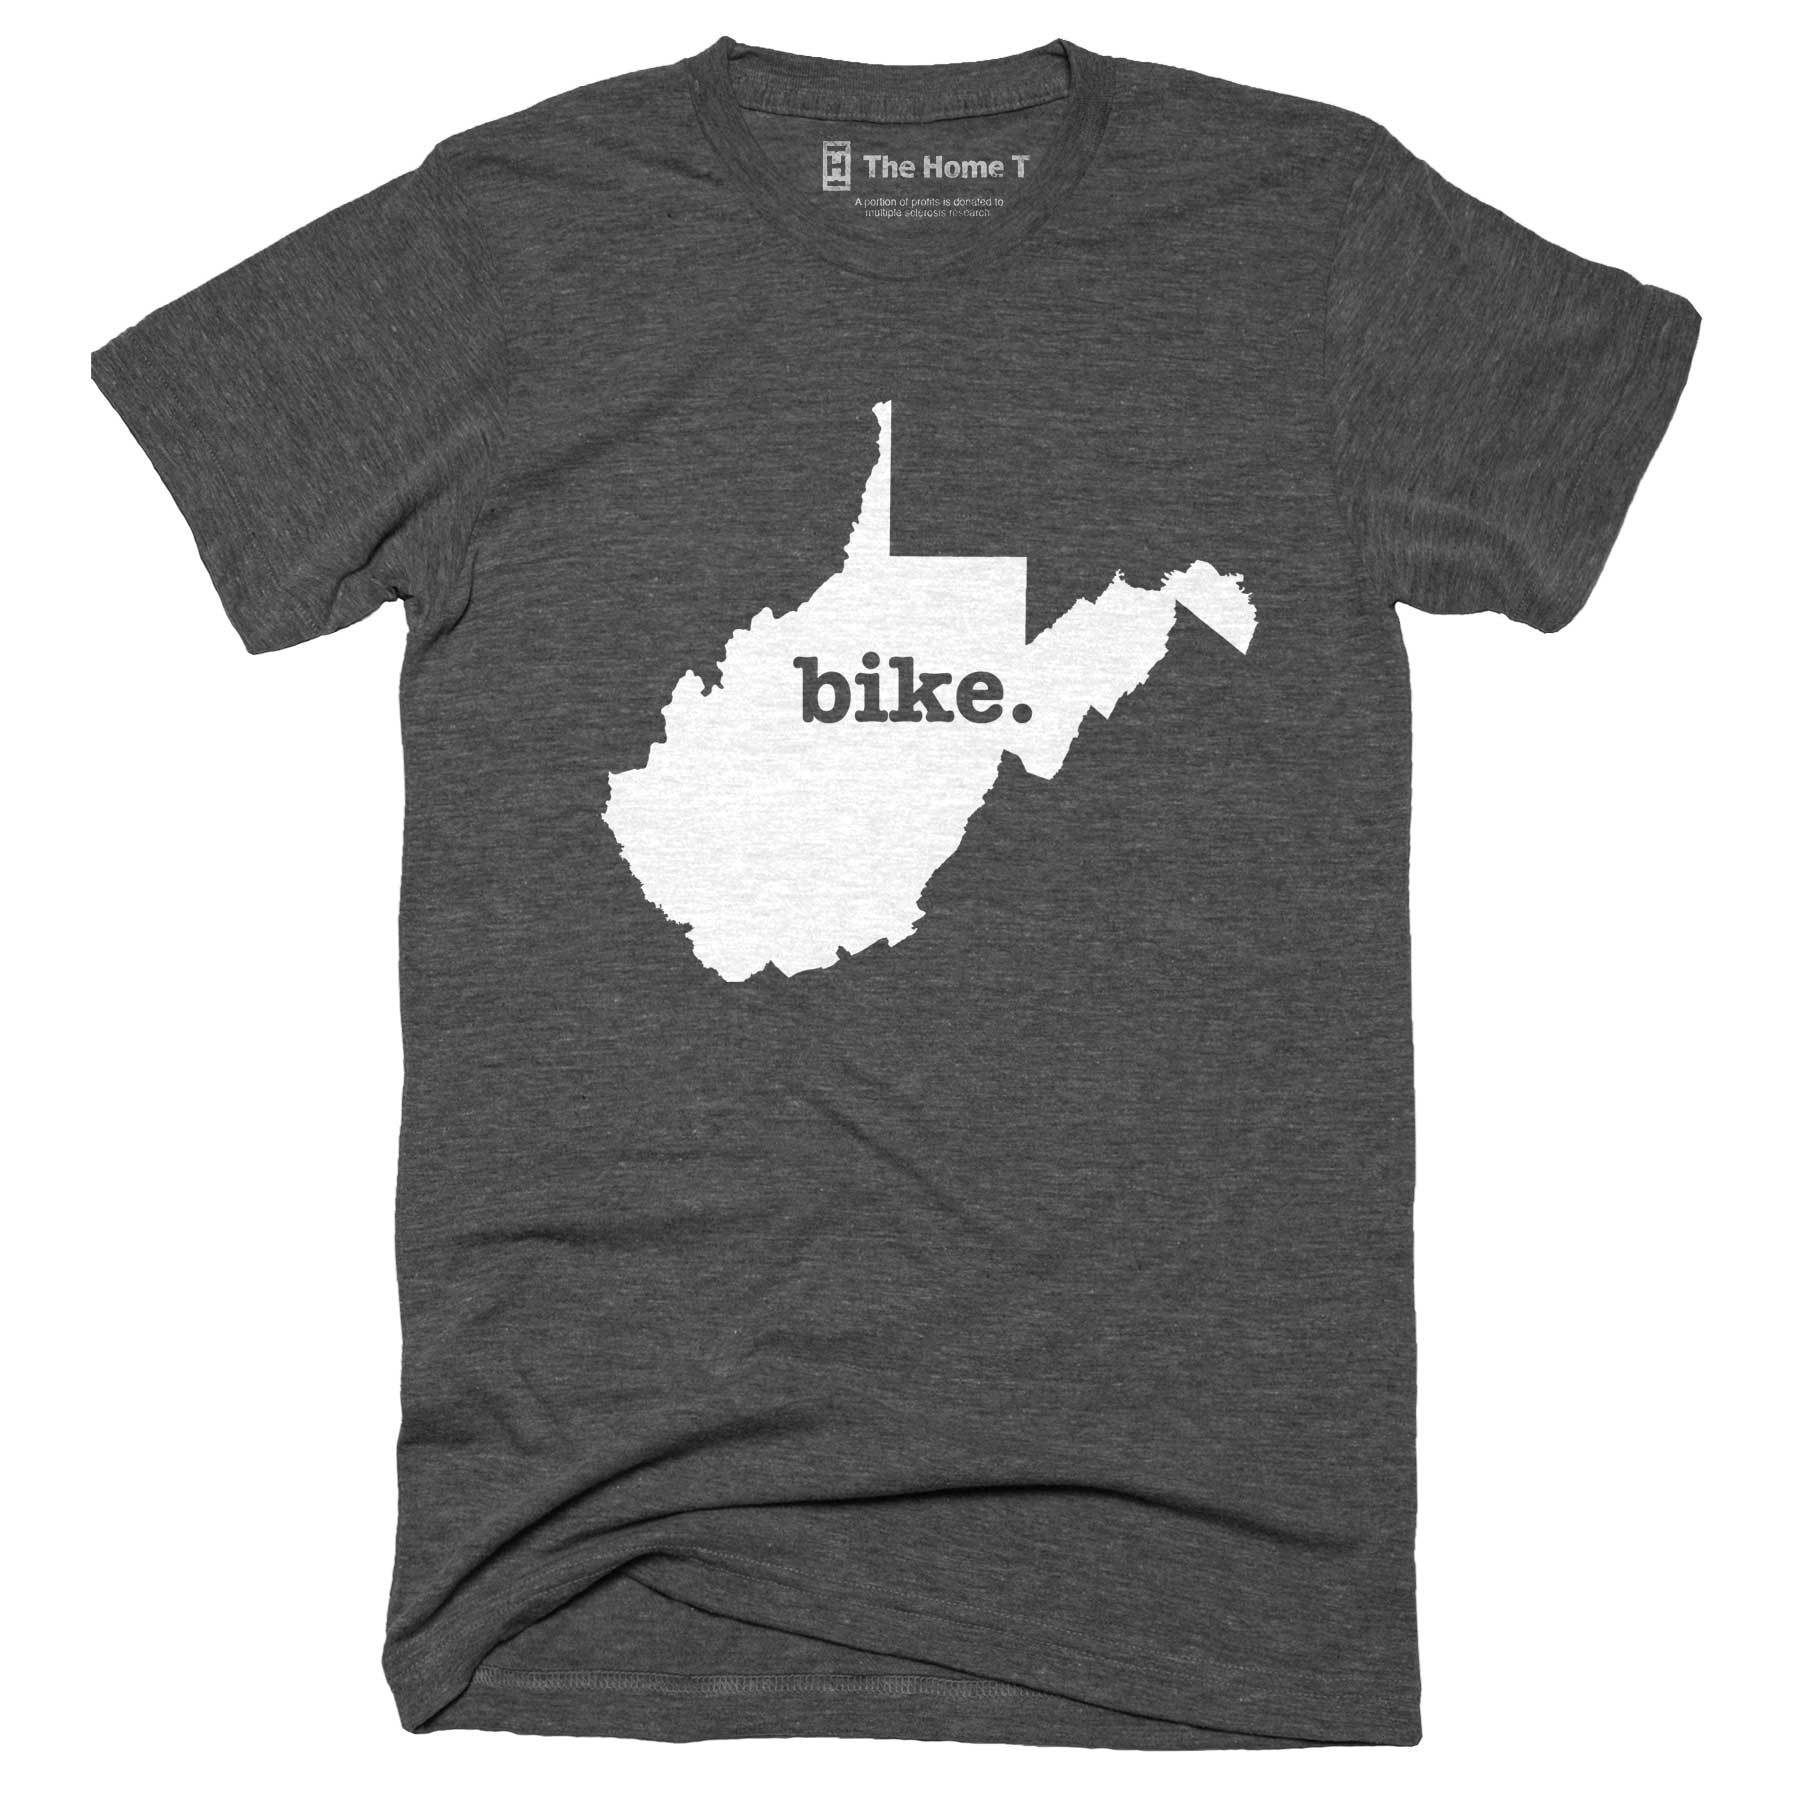 West Virginia Bike Home T-Shirt Outdoor Collection The Home T